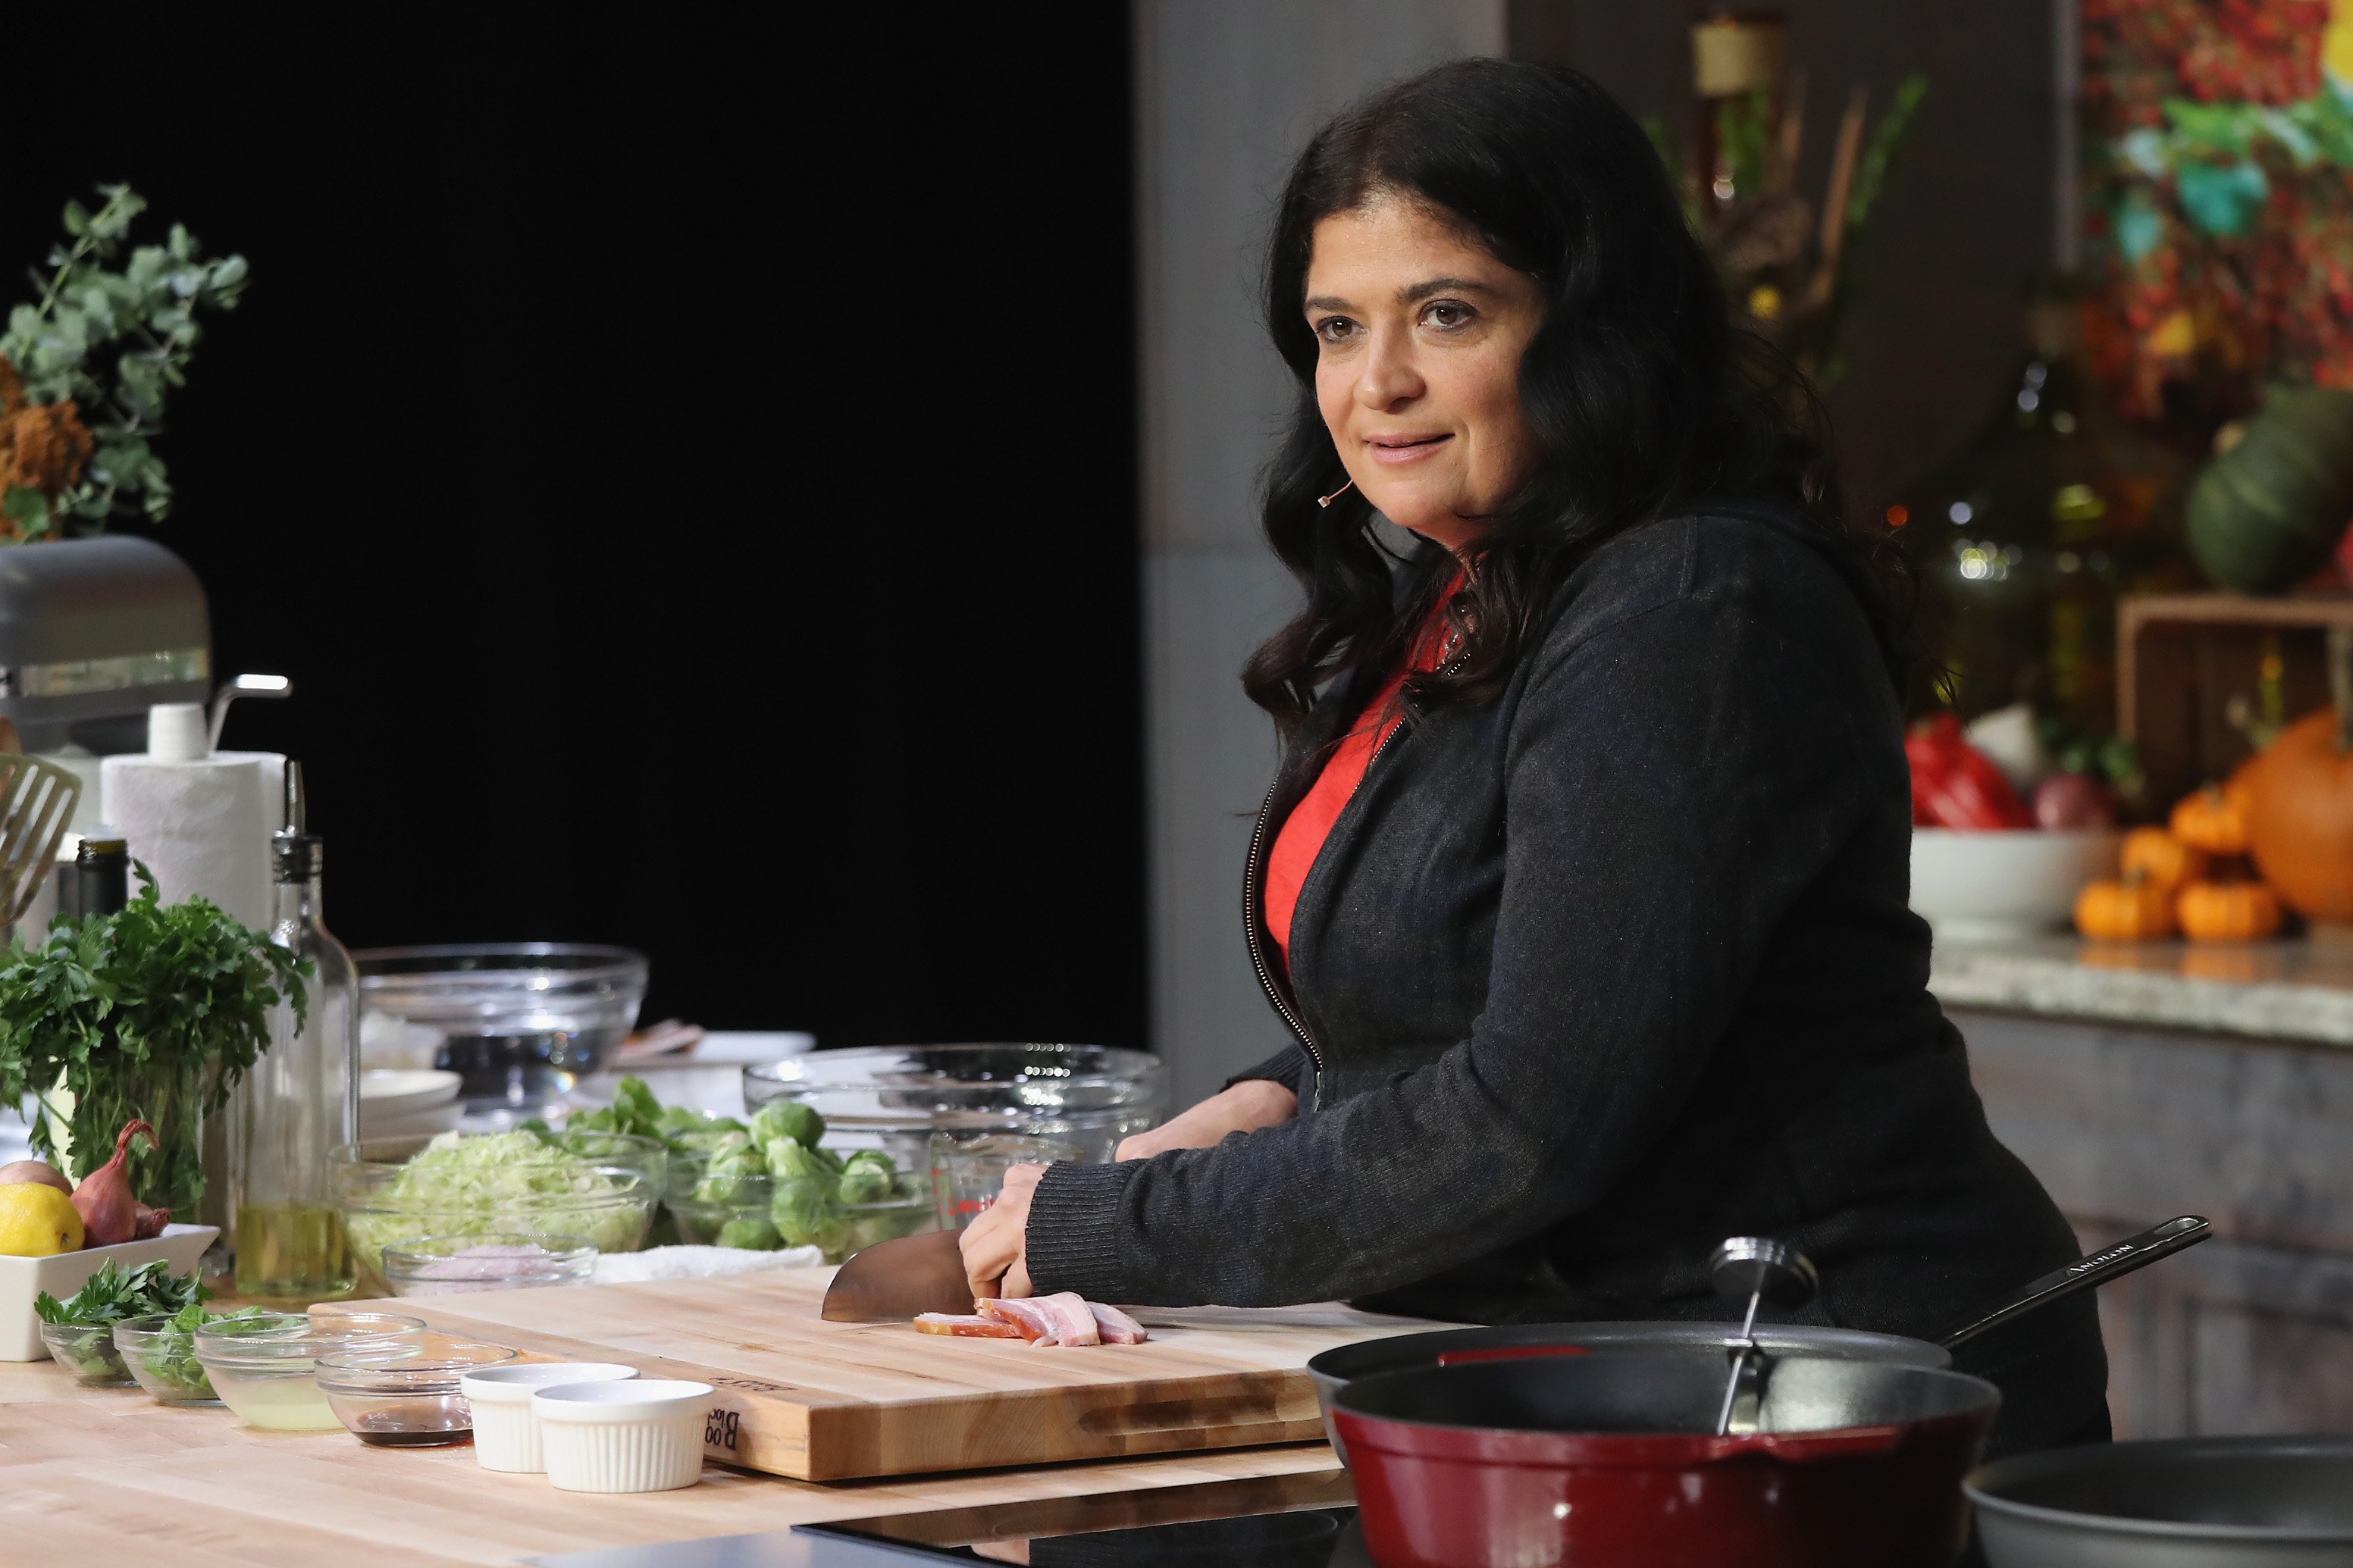 Alex Guarnaschelli during the Grand Tasting at Pier 94 on October 14, 2018 in New York City. / Source: Getty Images